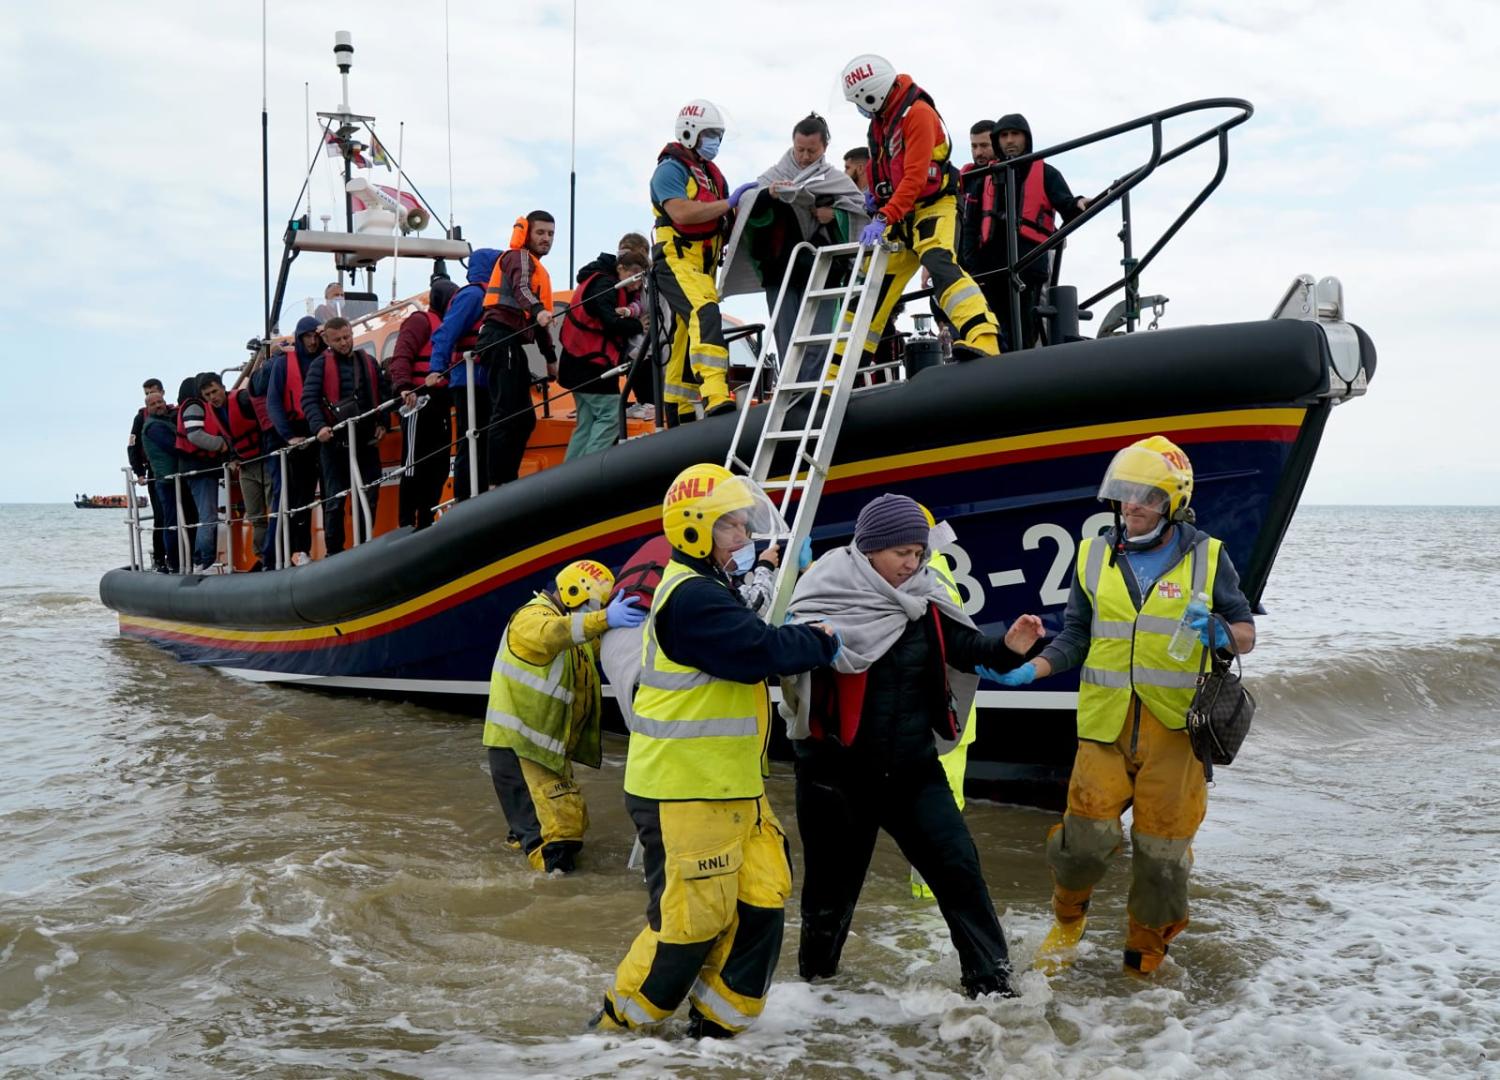 A group of people thought to be migrants are brought in to Dungeness, Kent, after being rescued from a small boat in the English Channel (Gareth Fuller via Getty Images)